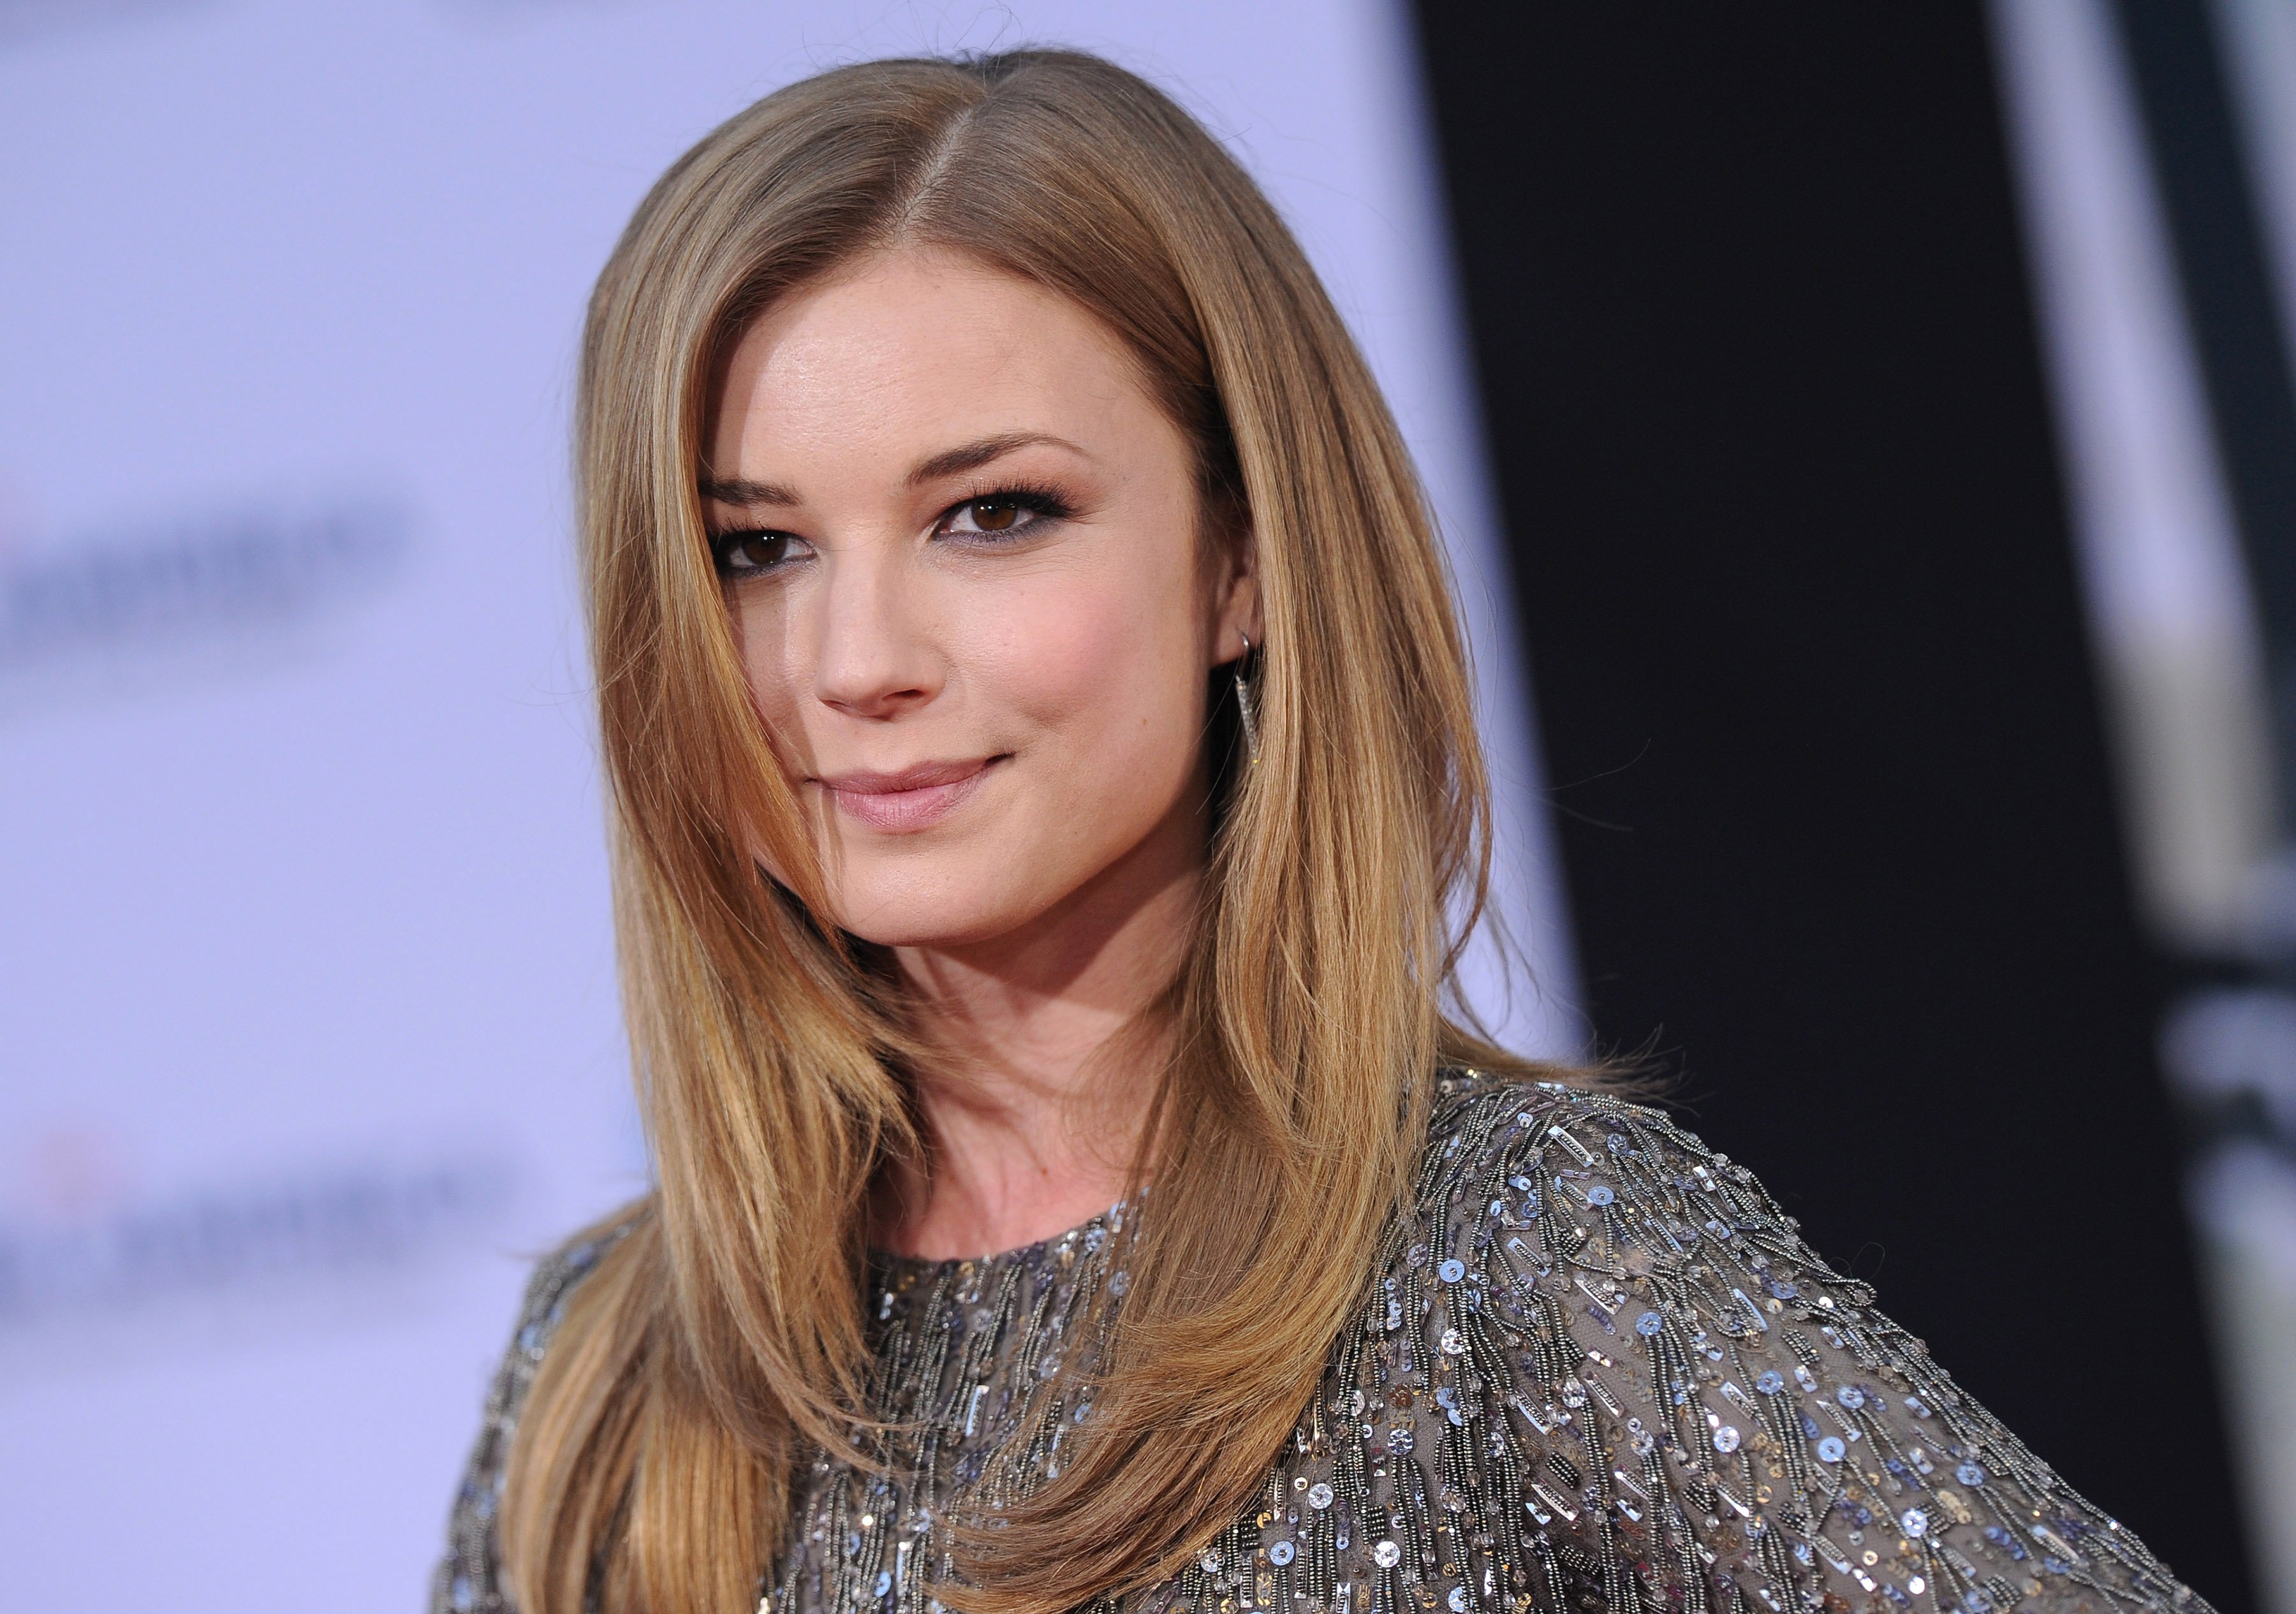 Emily VanCamp arrives at the Los Angeles premiere of 'Captain America: The Winter Soldier' on March 13, 2014 in Hollywood, California.